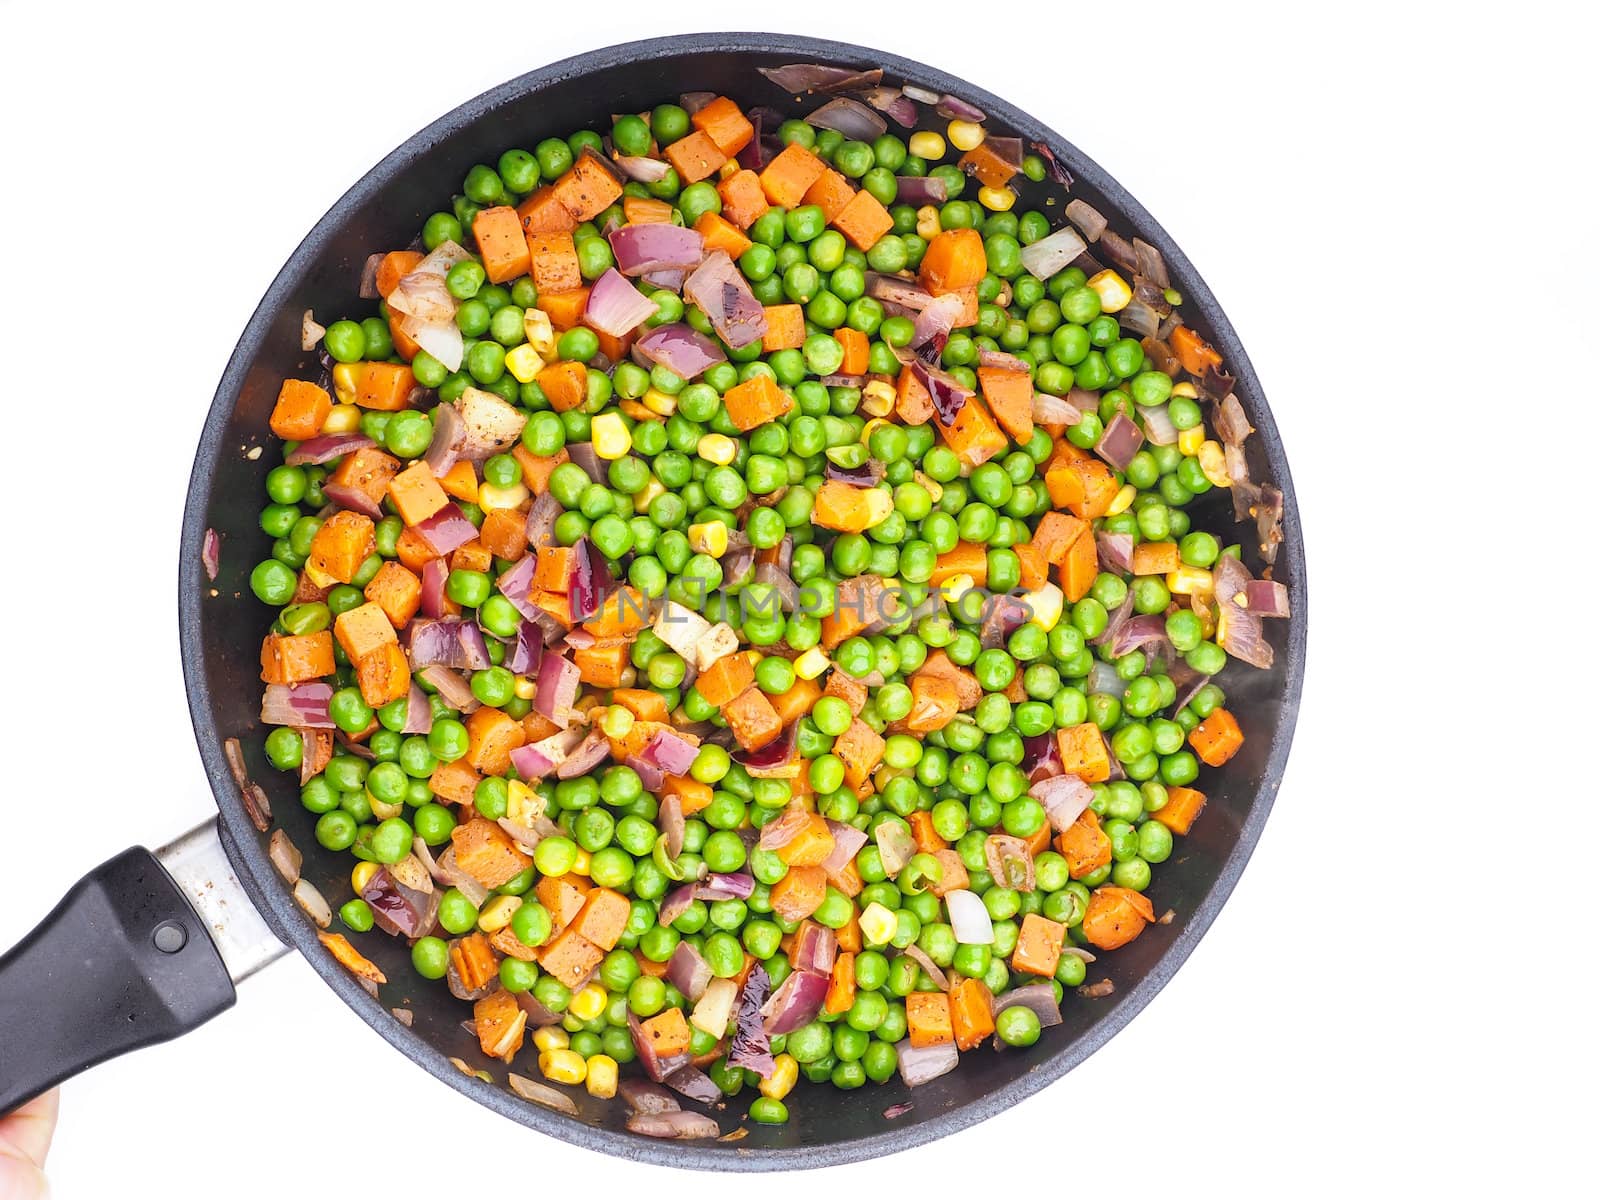 Frying vegetables in a fry pan, peas, red onion and corn by Arvebettum